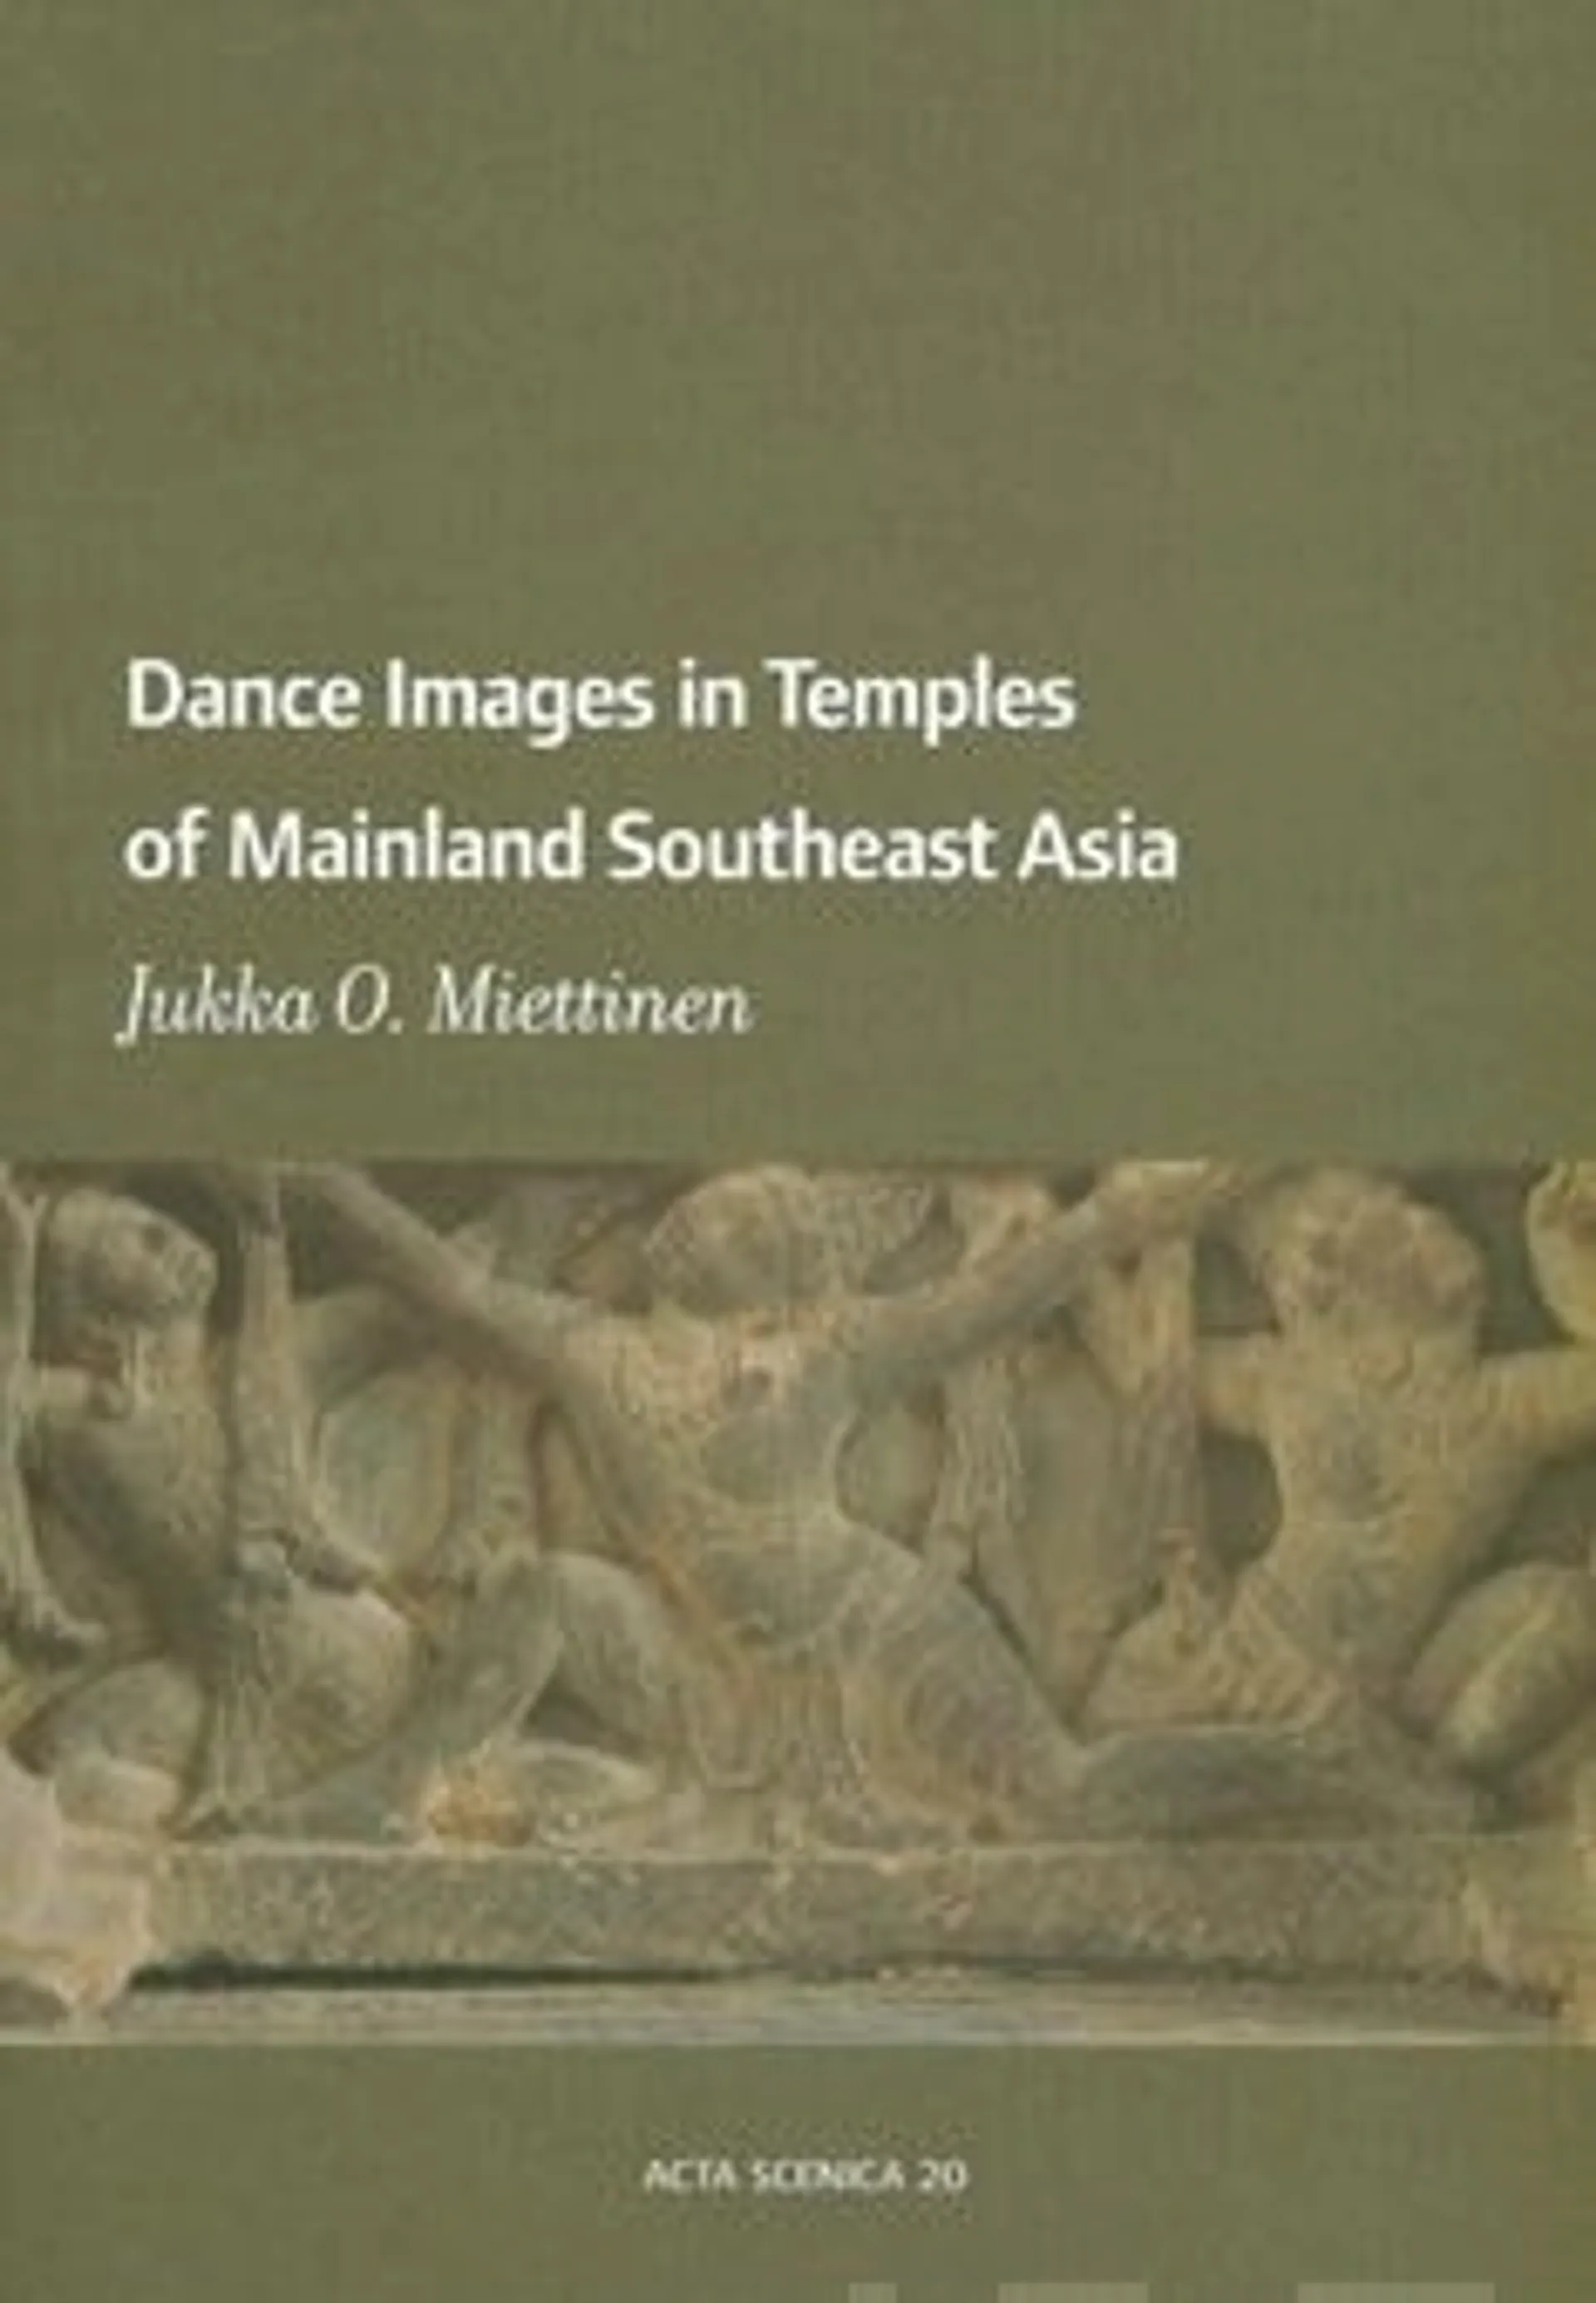 Miettinen, Dance Images in Temples of Mainland Southeast Asia